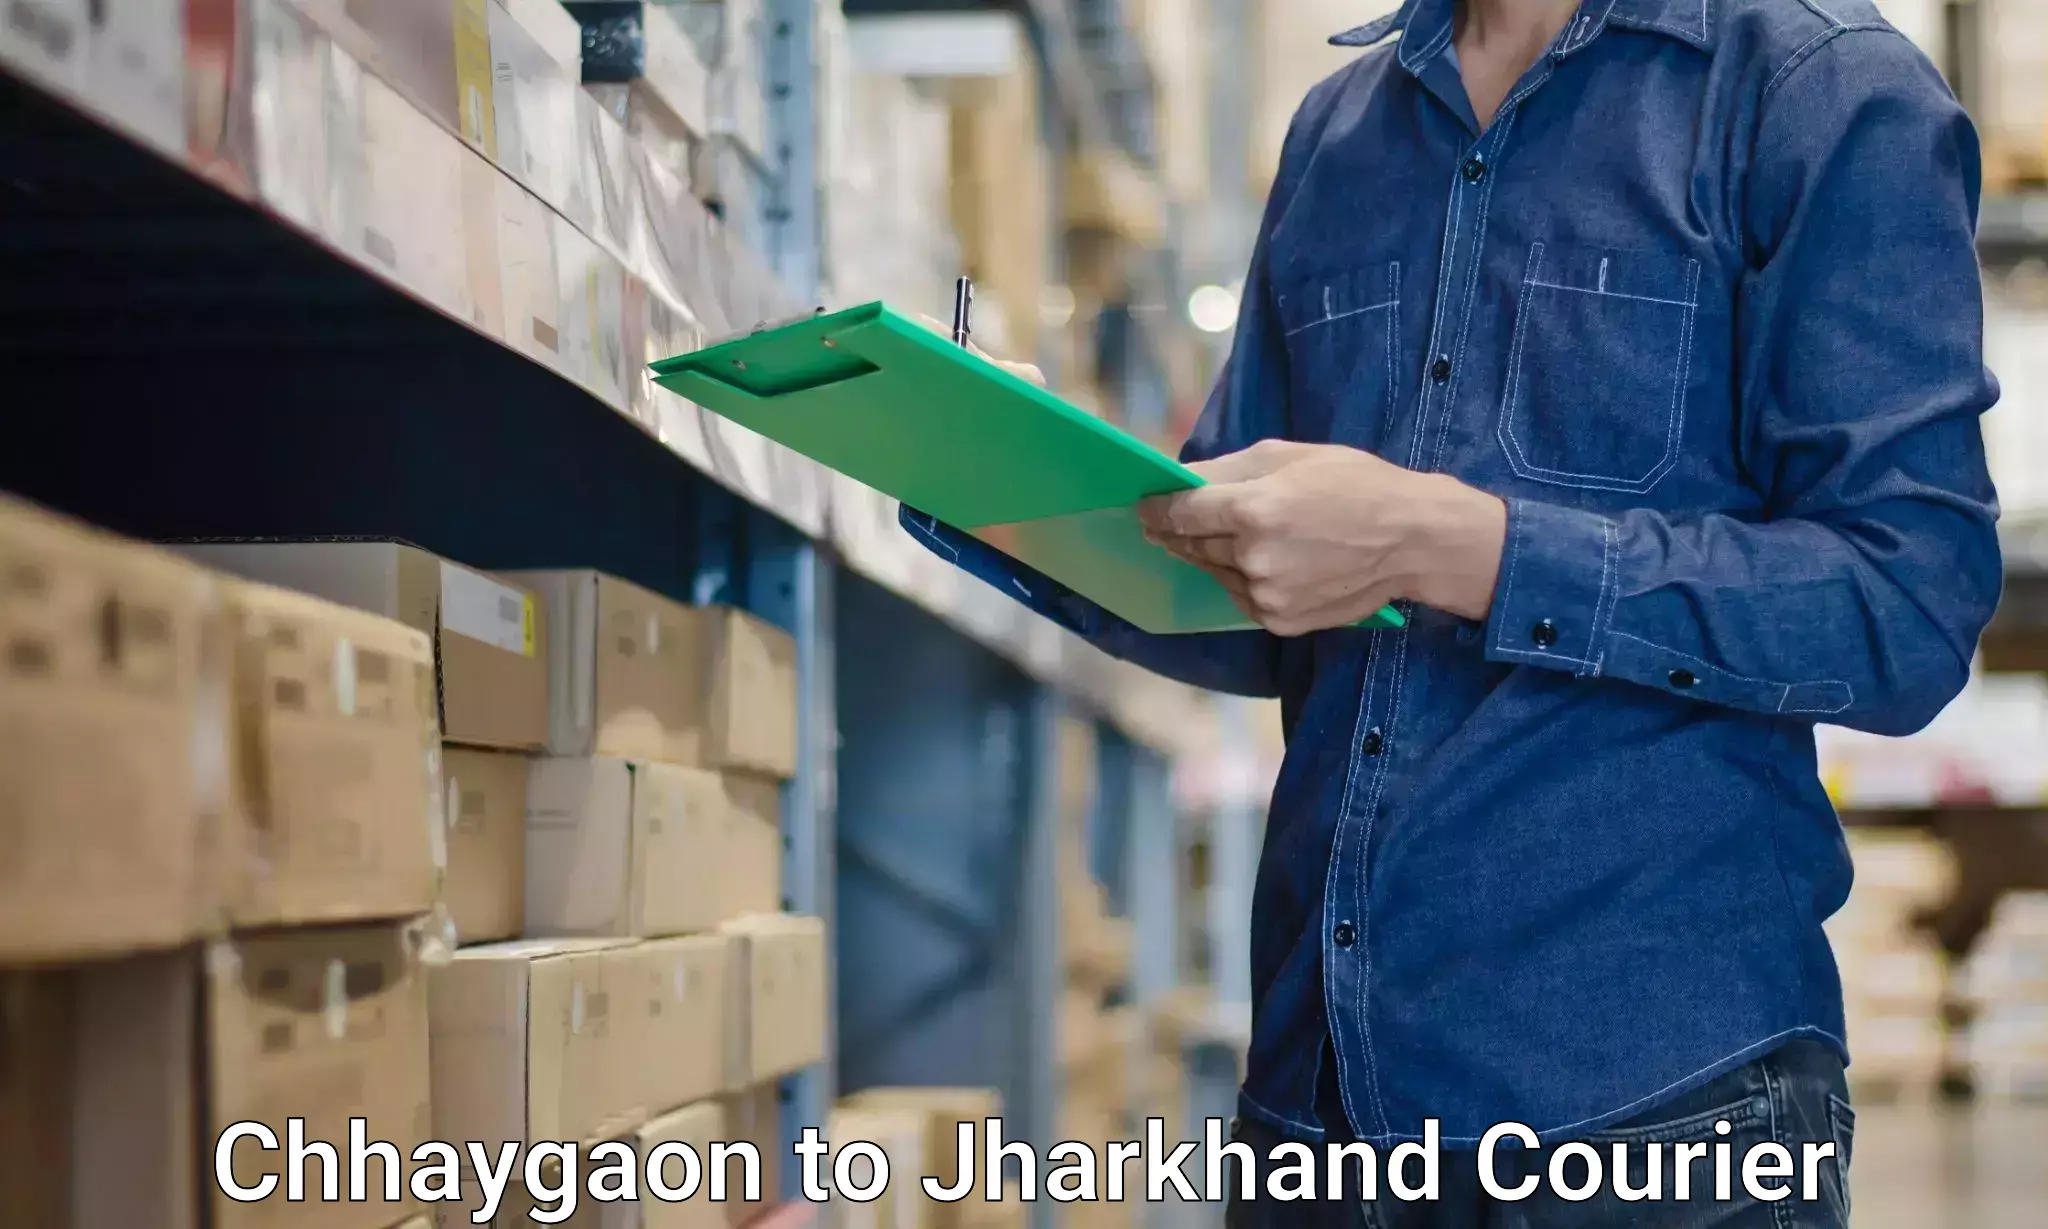 Trusted relocation experts Chhaygaon to Jharkhand